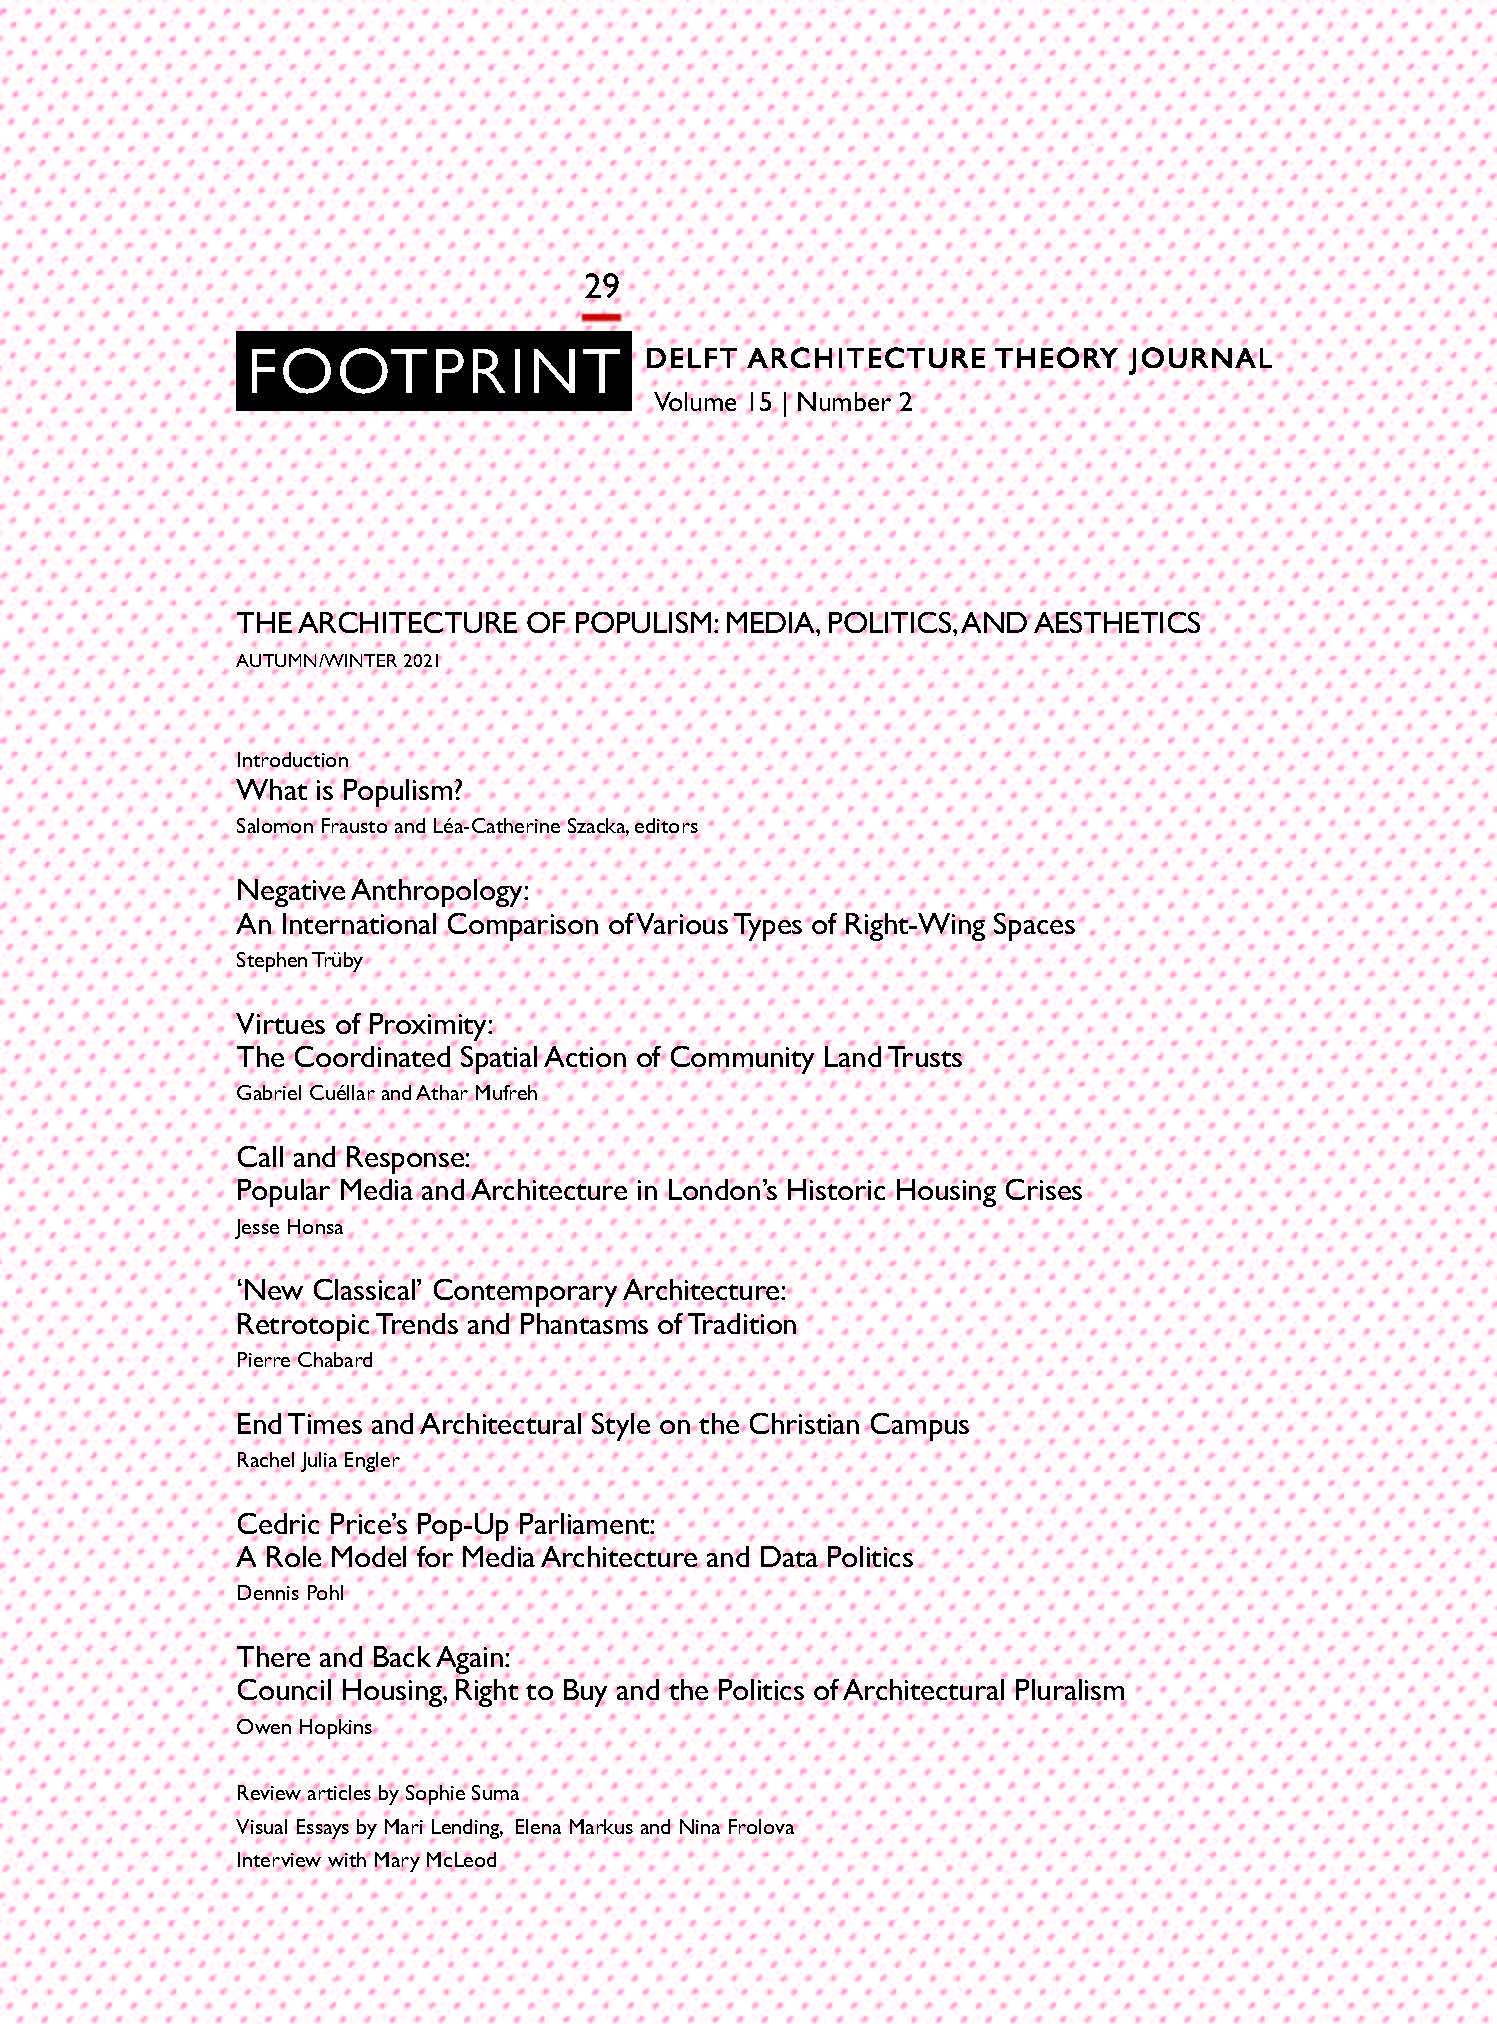 					View Vol. 15 No. 2 (2021): Issue # 29 | Autumn/ Winter 2021 |The Architecture of Populism: Media, Politics and Aesthetics
				